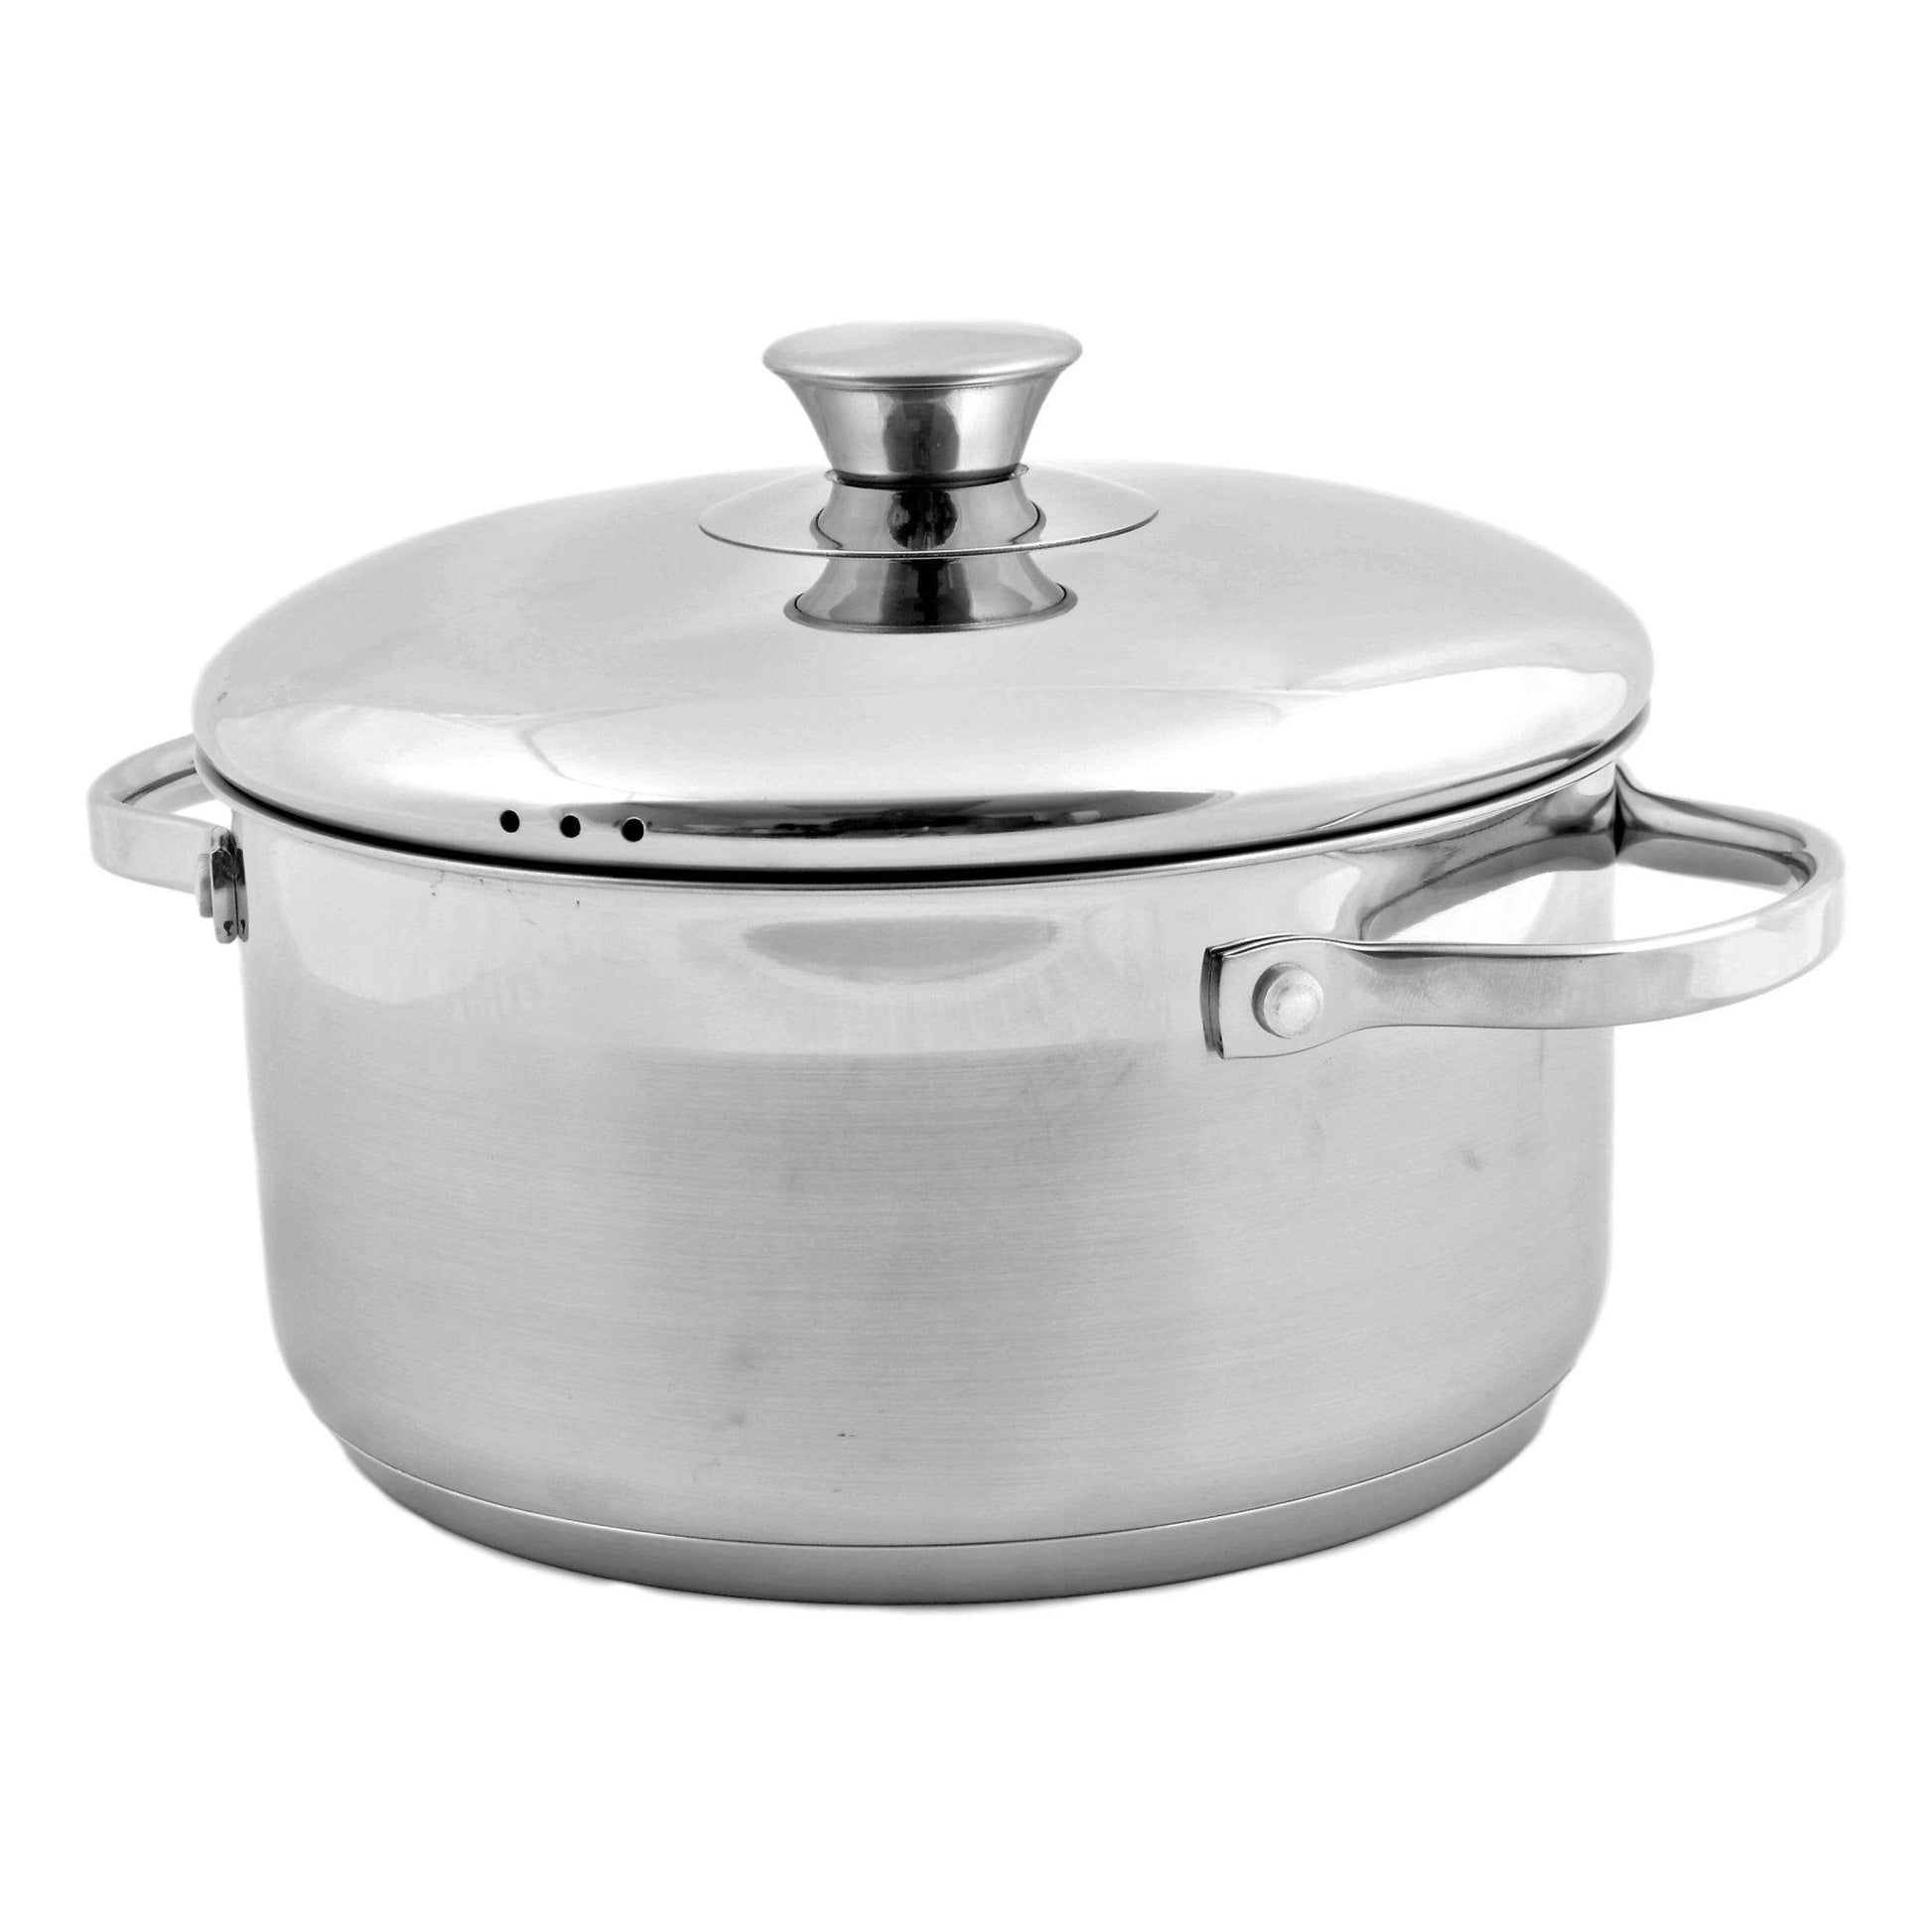 Stock Pot With Lid - Stainless Steel 2.4 Quart - Nature Home Decor